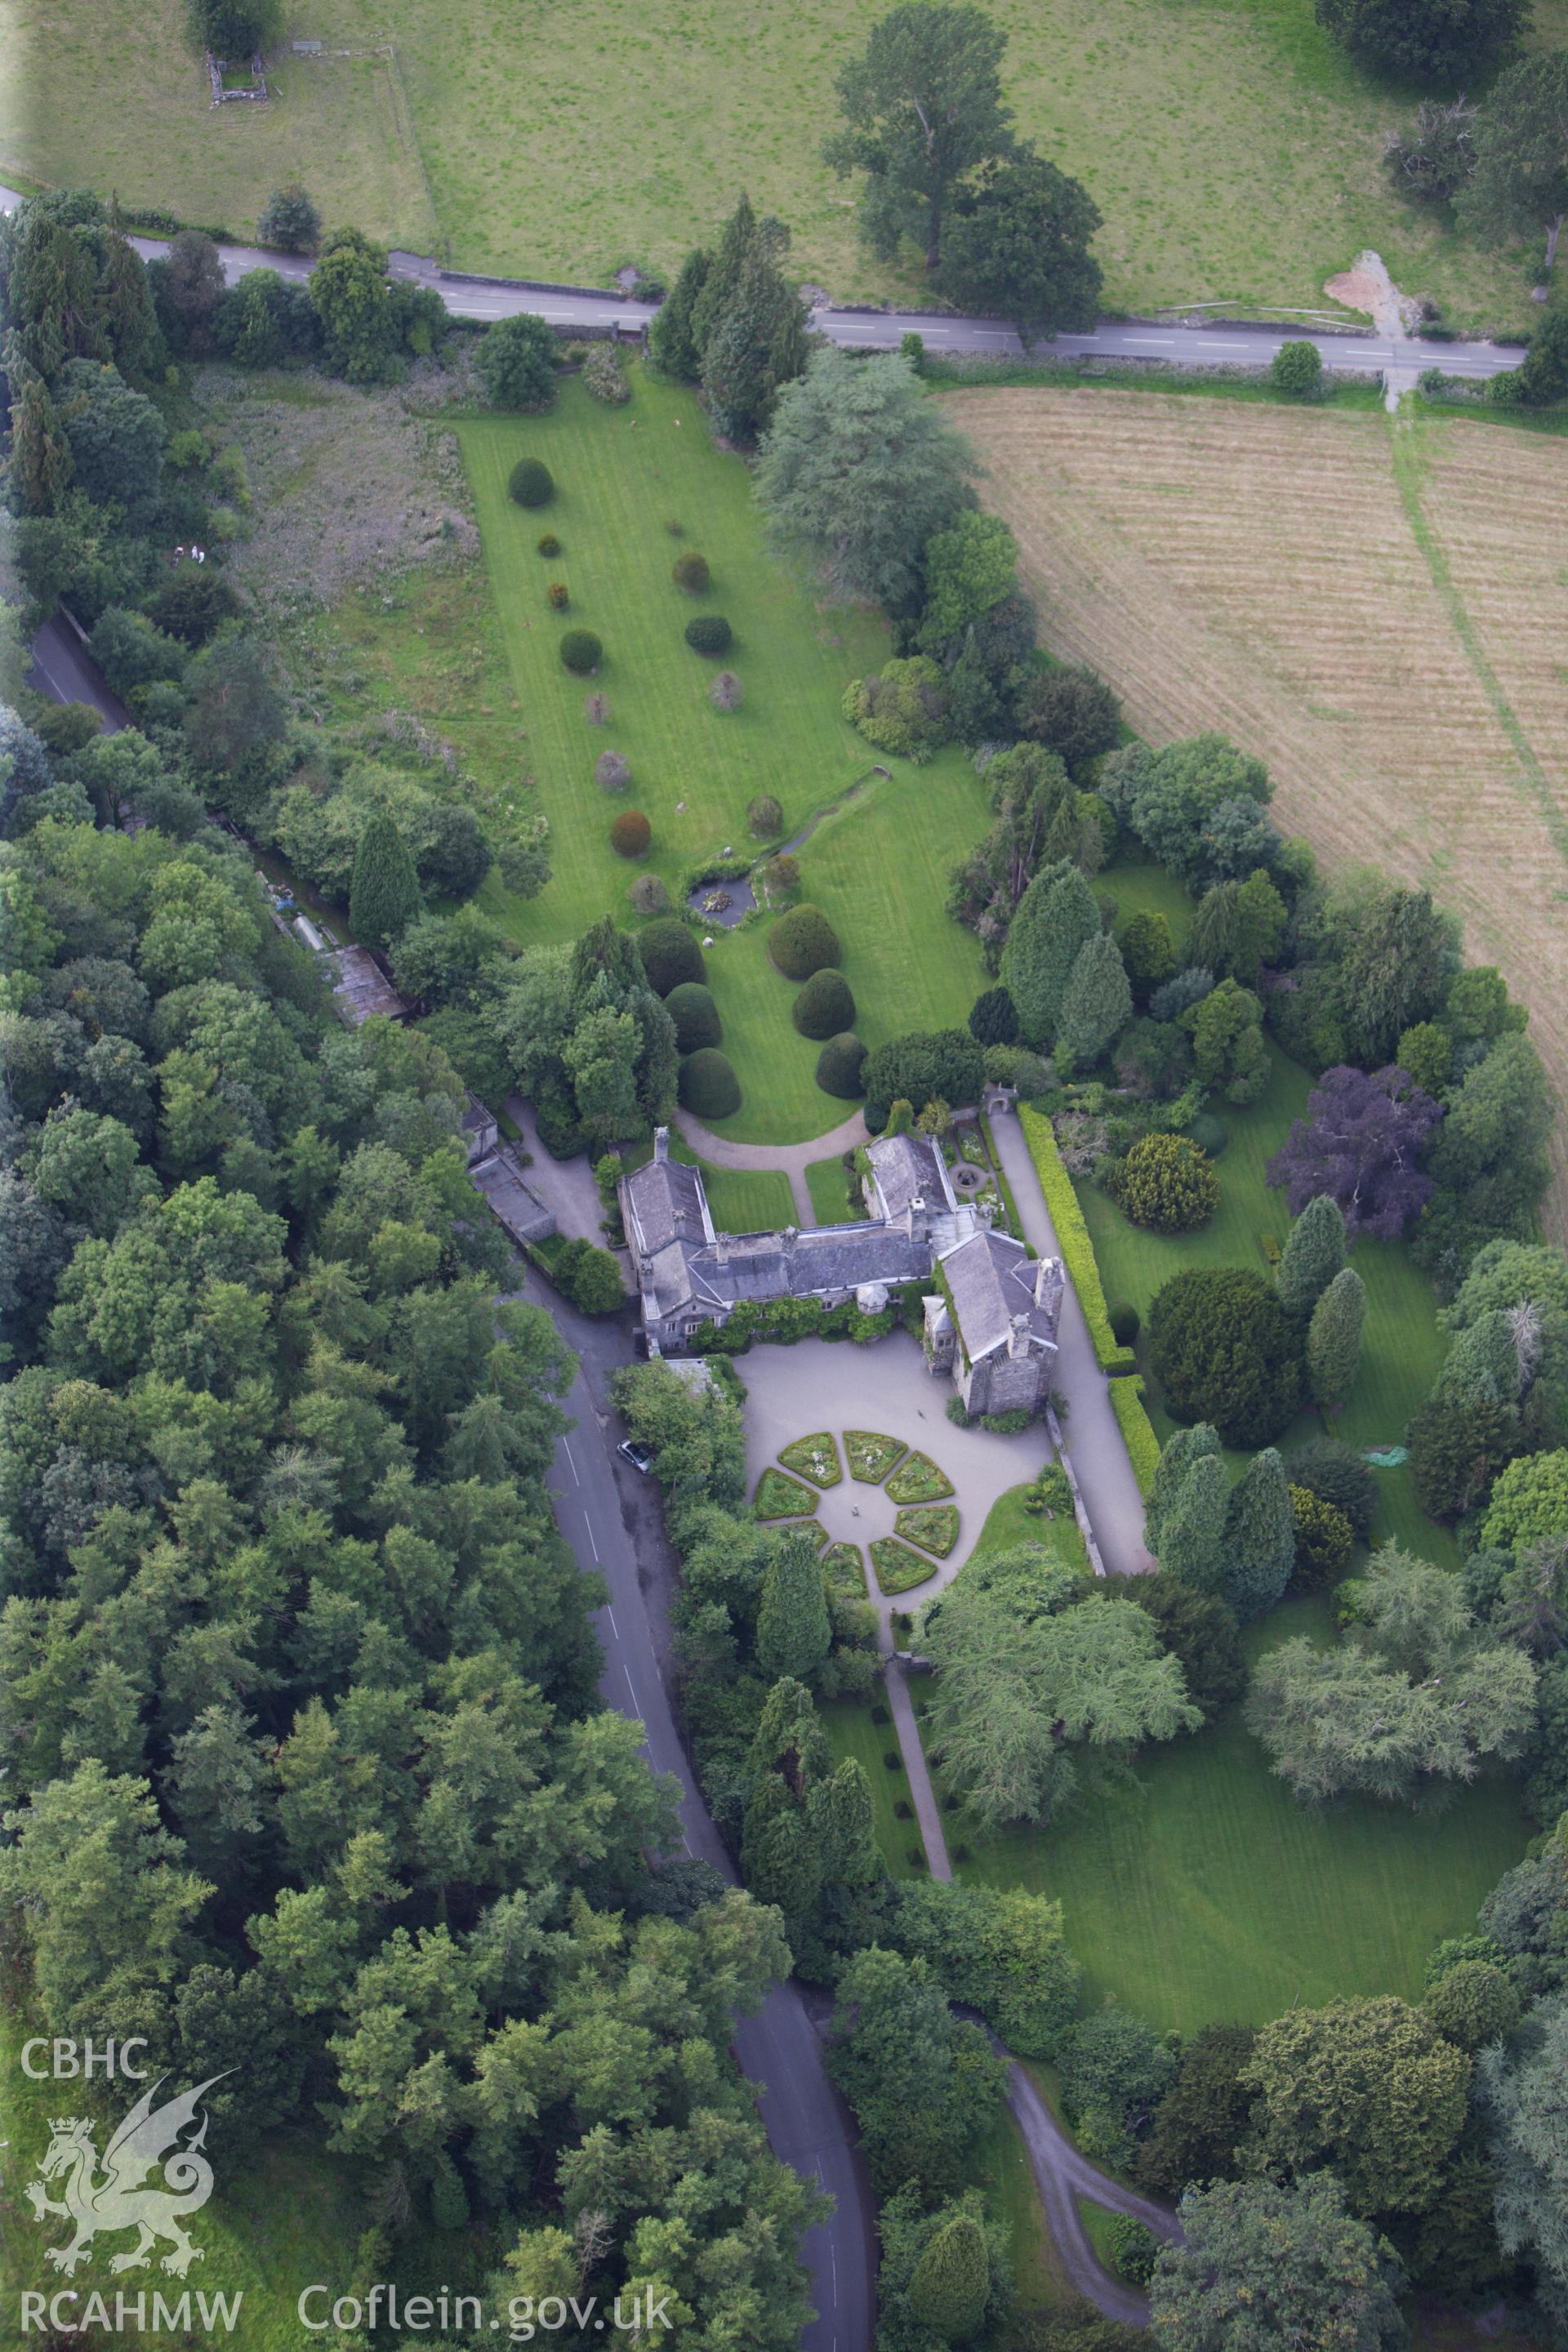 RCAHMW colour oblique aerial photograph of Gwydir Castle Garden, Llanrwst. Taken on 06 August 2009 by Toby Driver